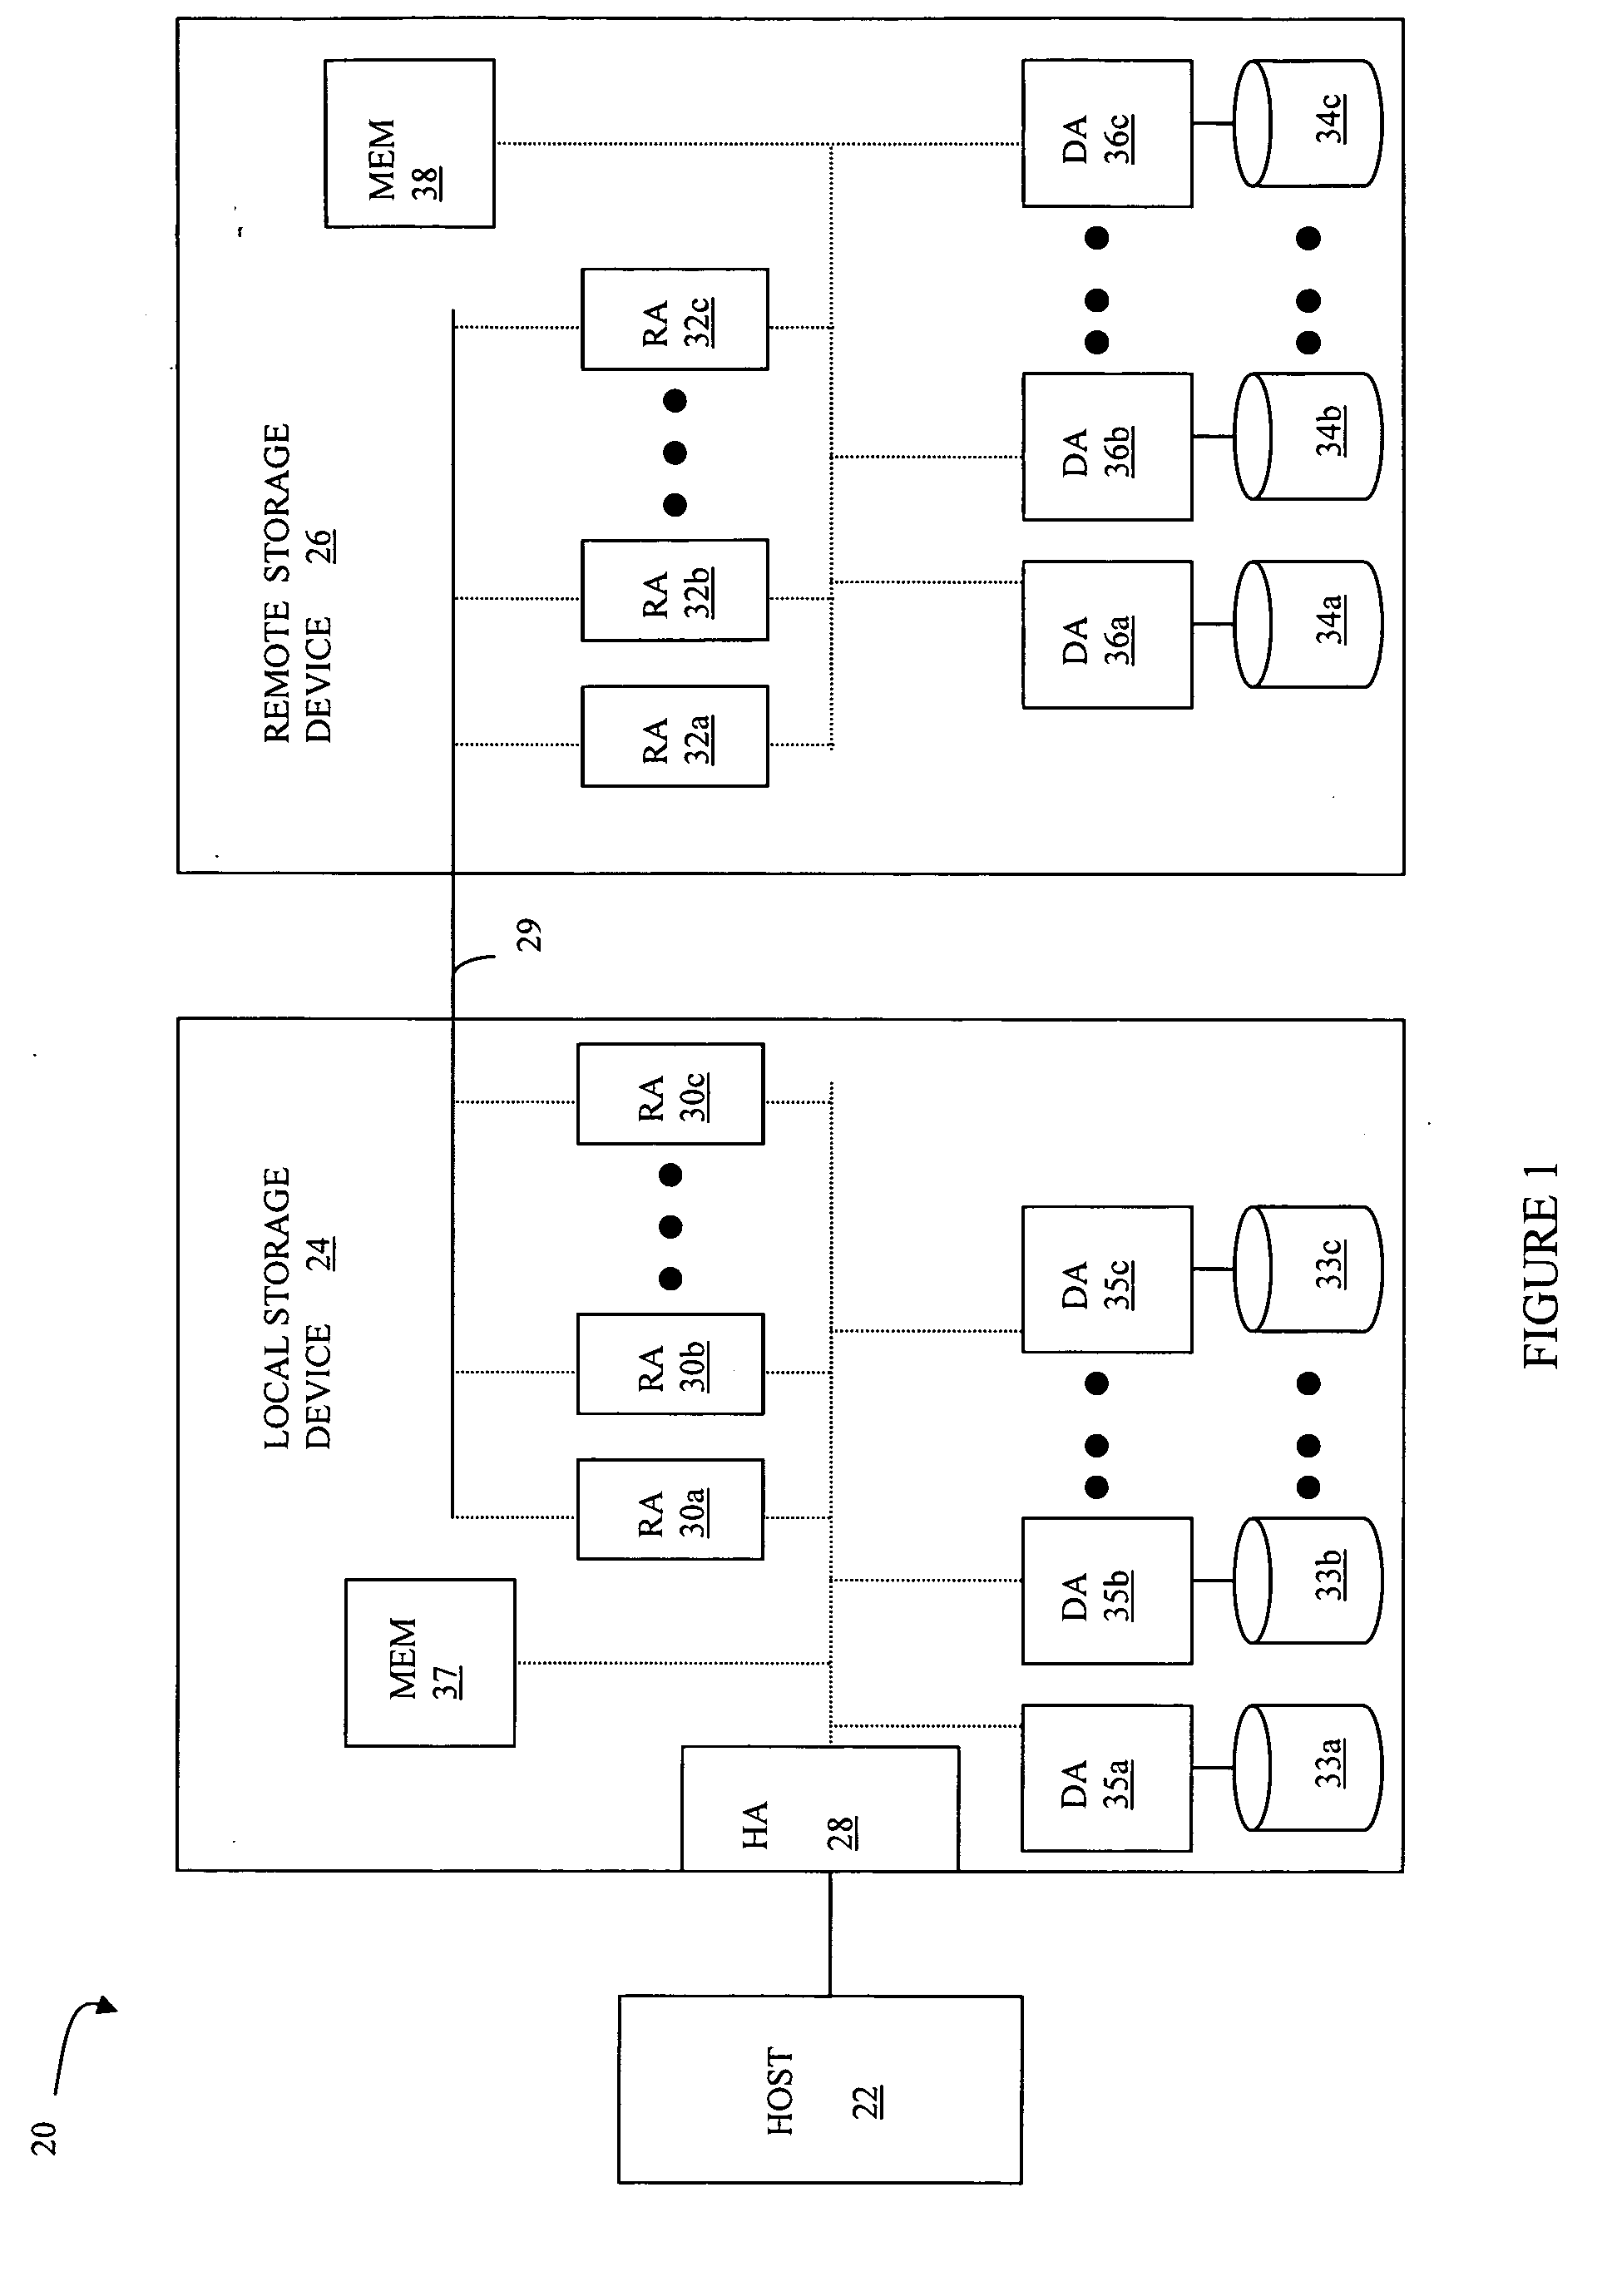 Failover to synchronous backup site in connection with triangular asynchronous replication